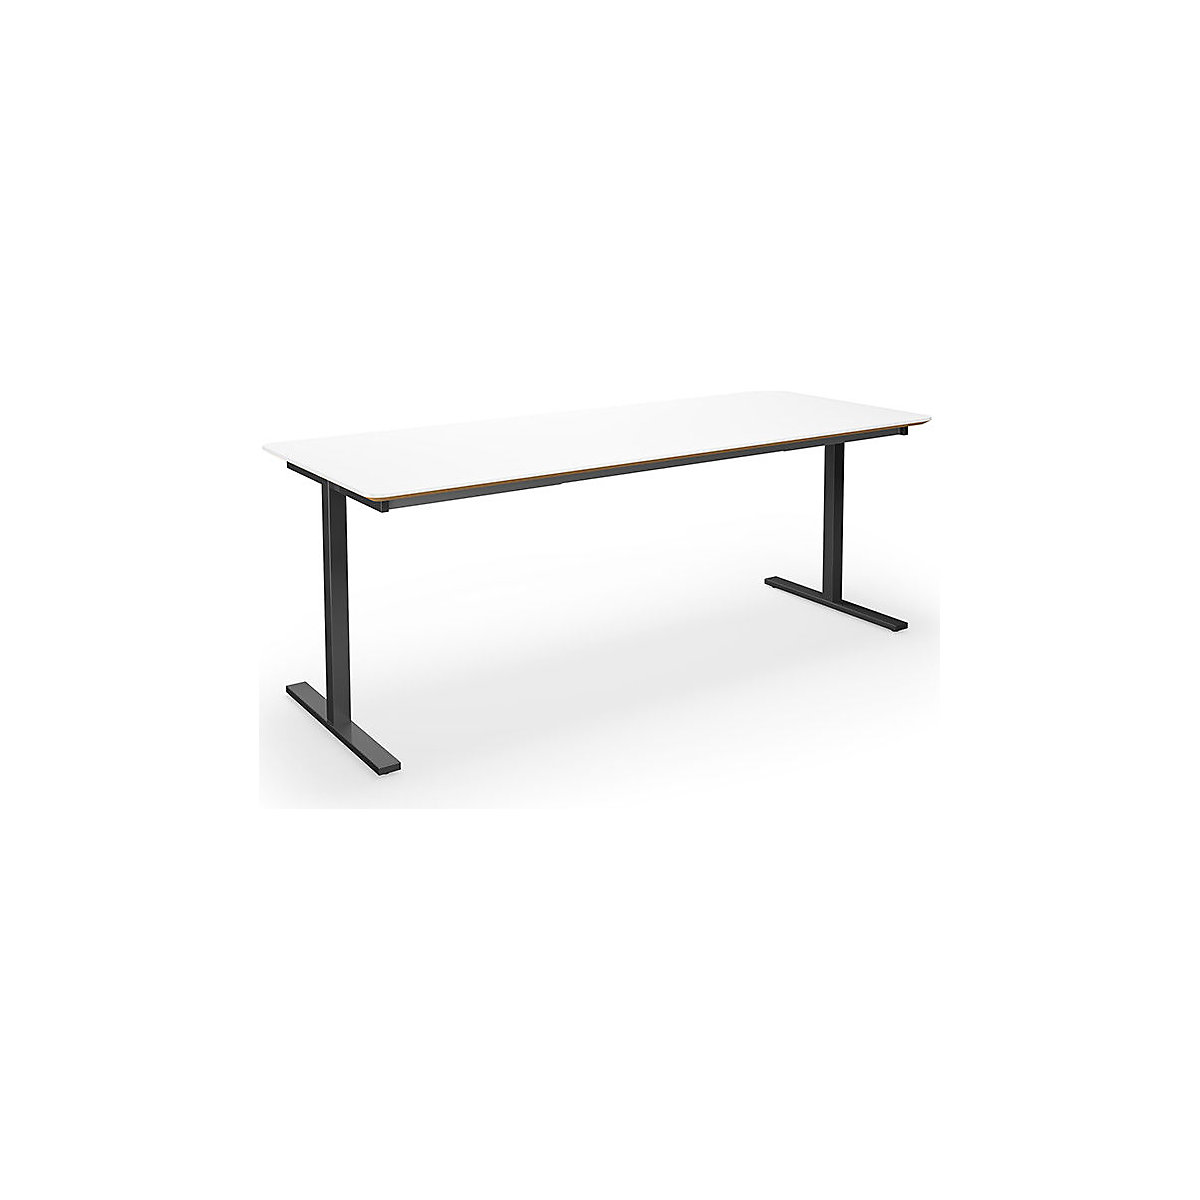 DUO-T Trend multi-purpose desk, straight tabletop, rounded corners, WxD 1800 x 800 mm, white, black-5